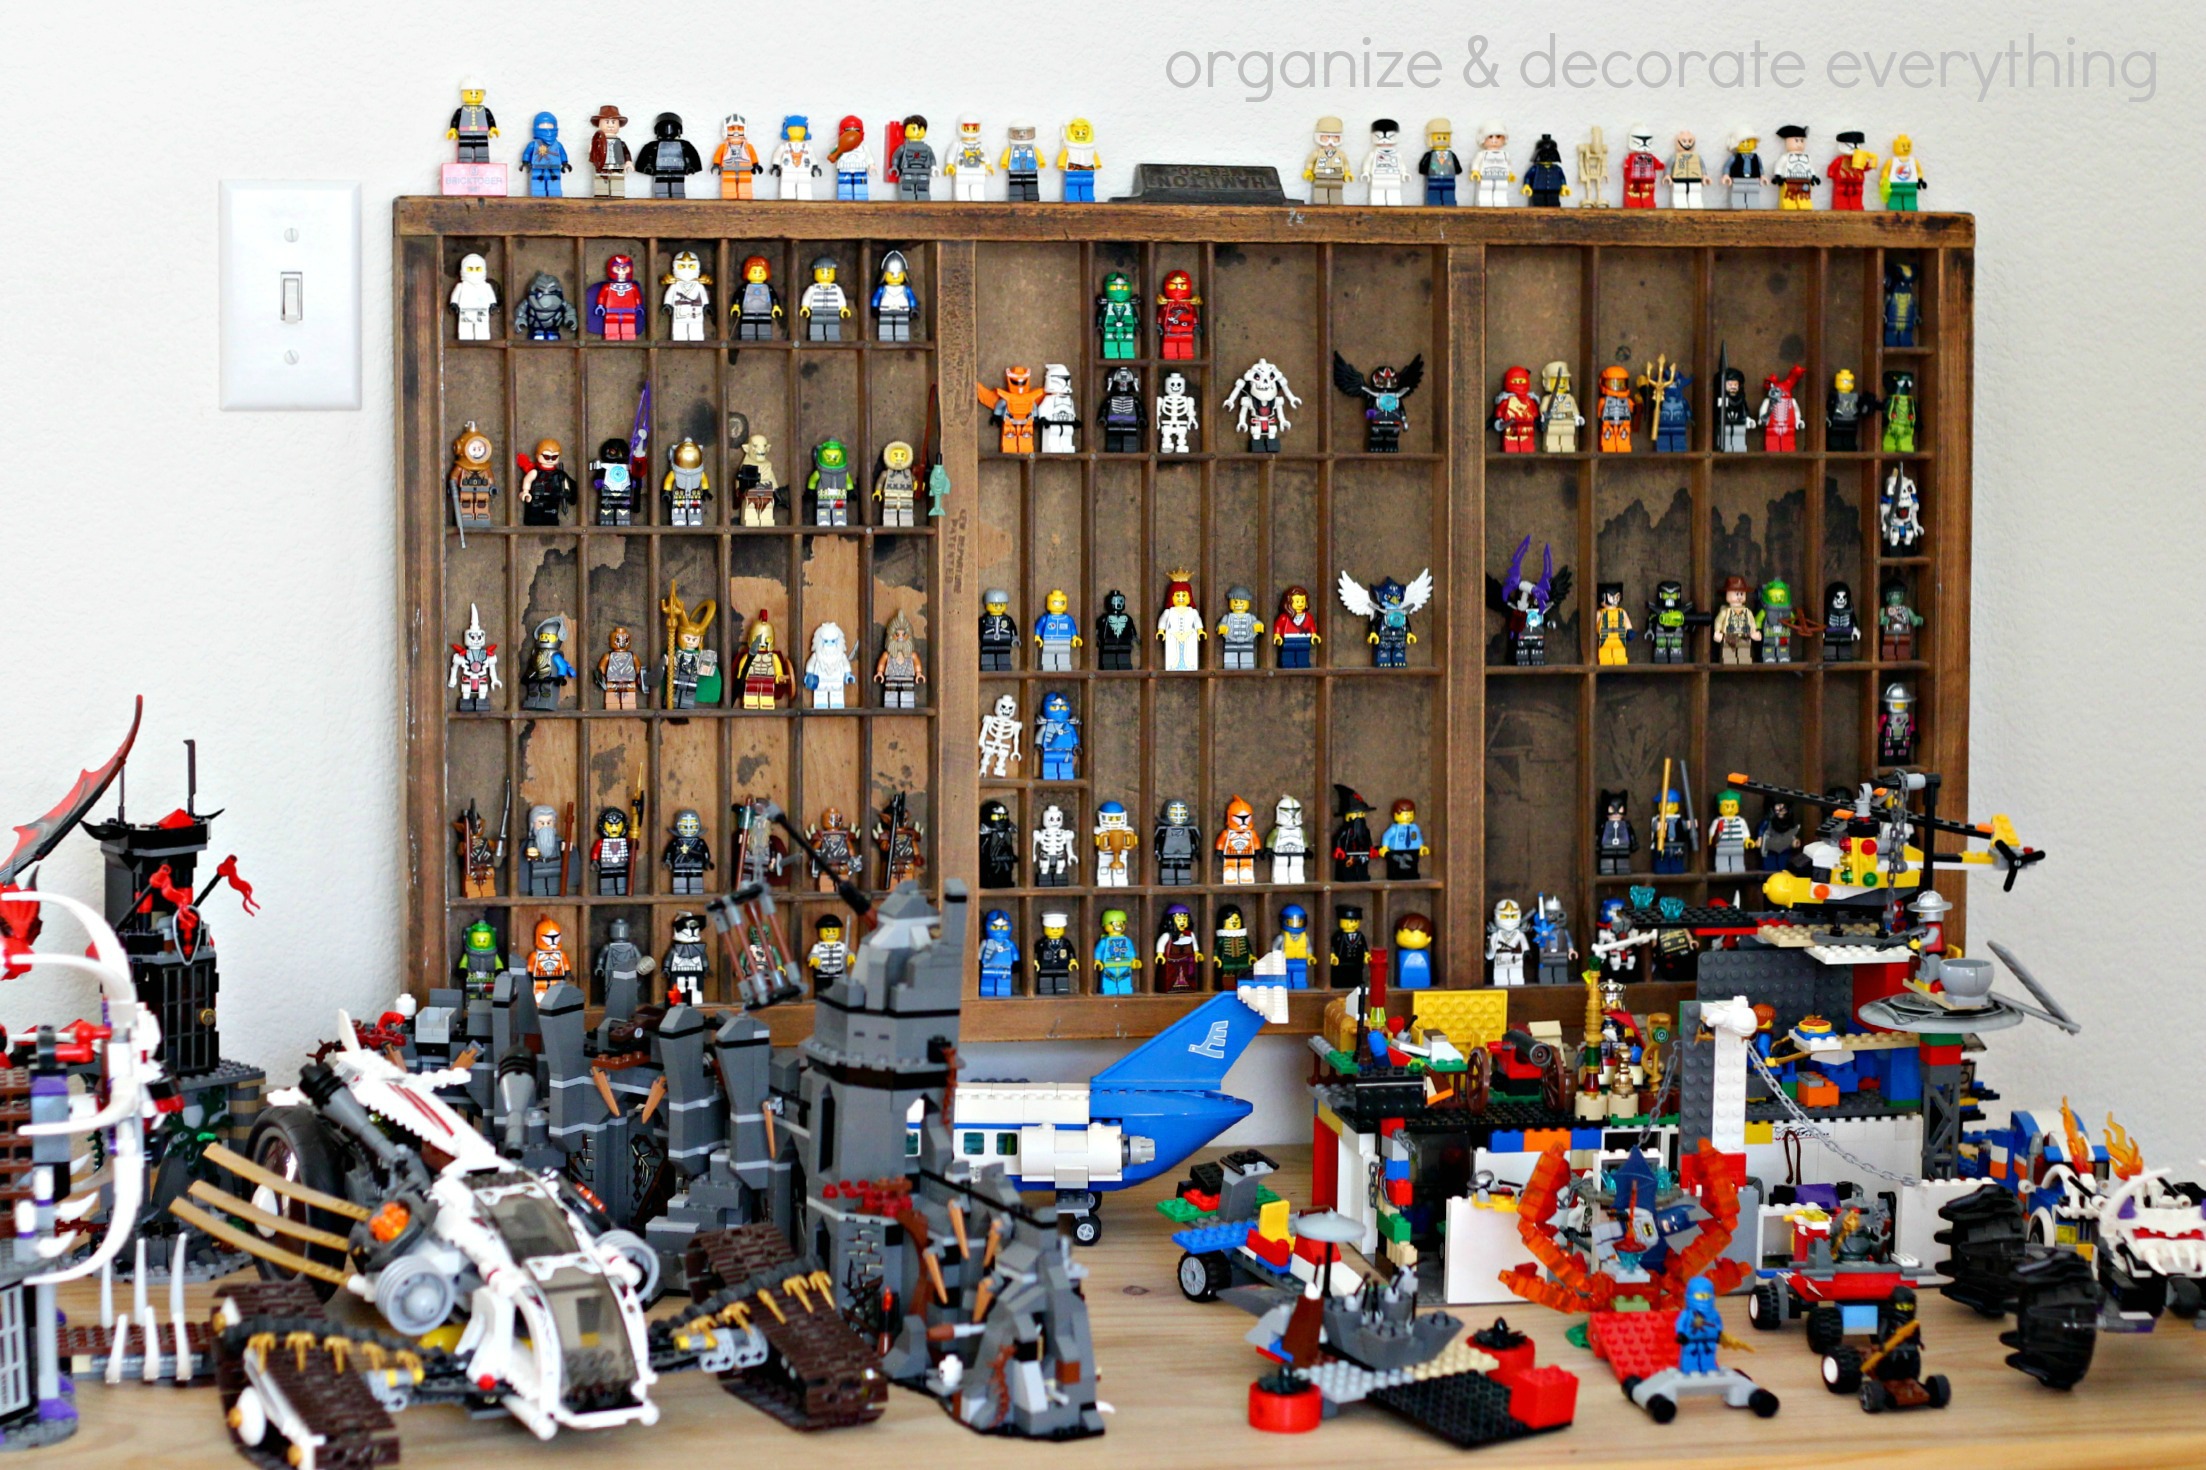 LEGO Mini Figure Display - Organize and Decorate Everything